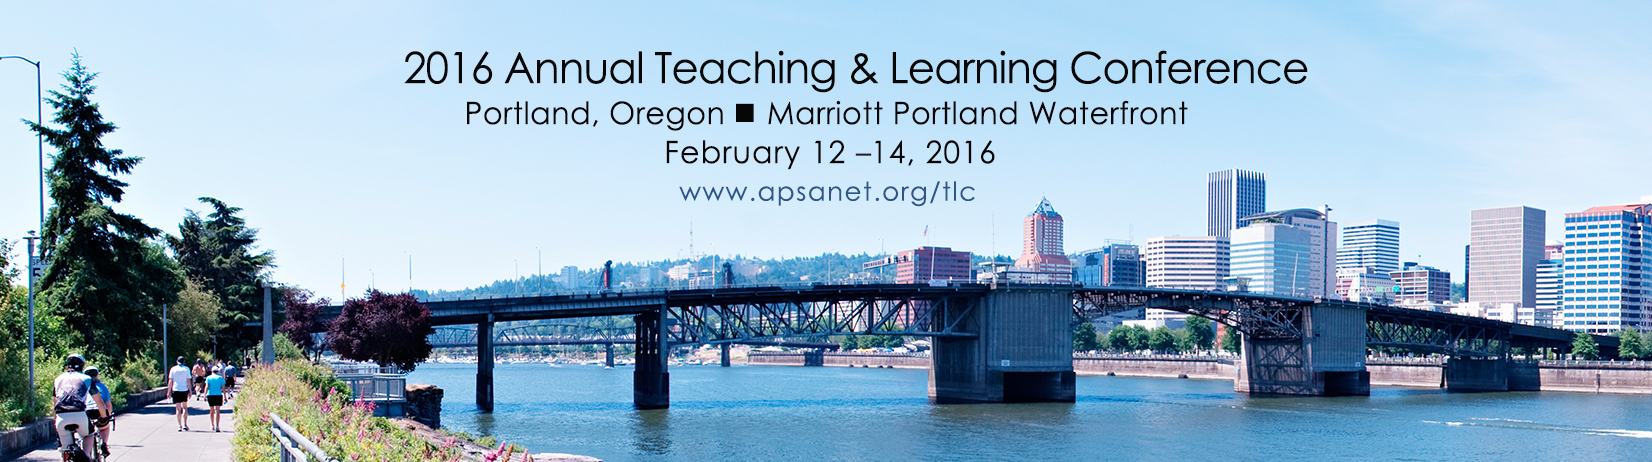 2016 Annual Teaching & Learning Conference - Portland, Oregon - Marriott Portland Waterfront - February 12 to 14, 2016